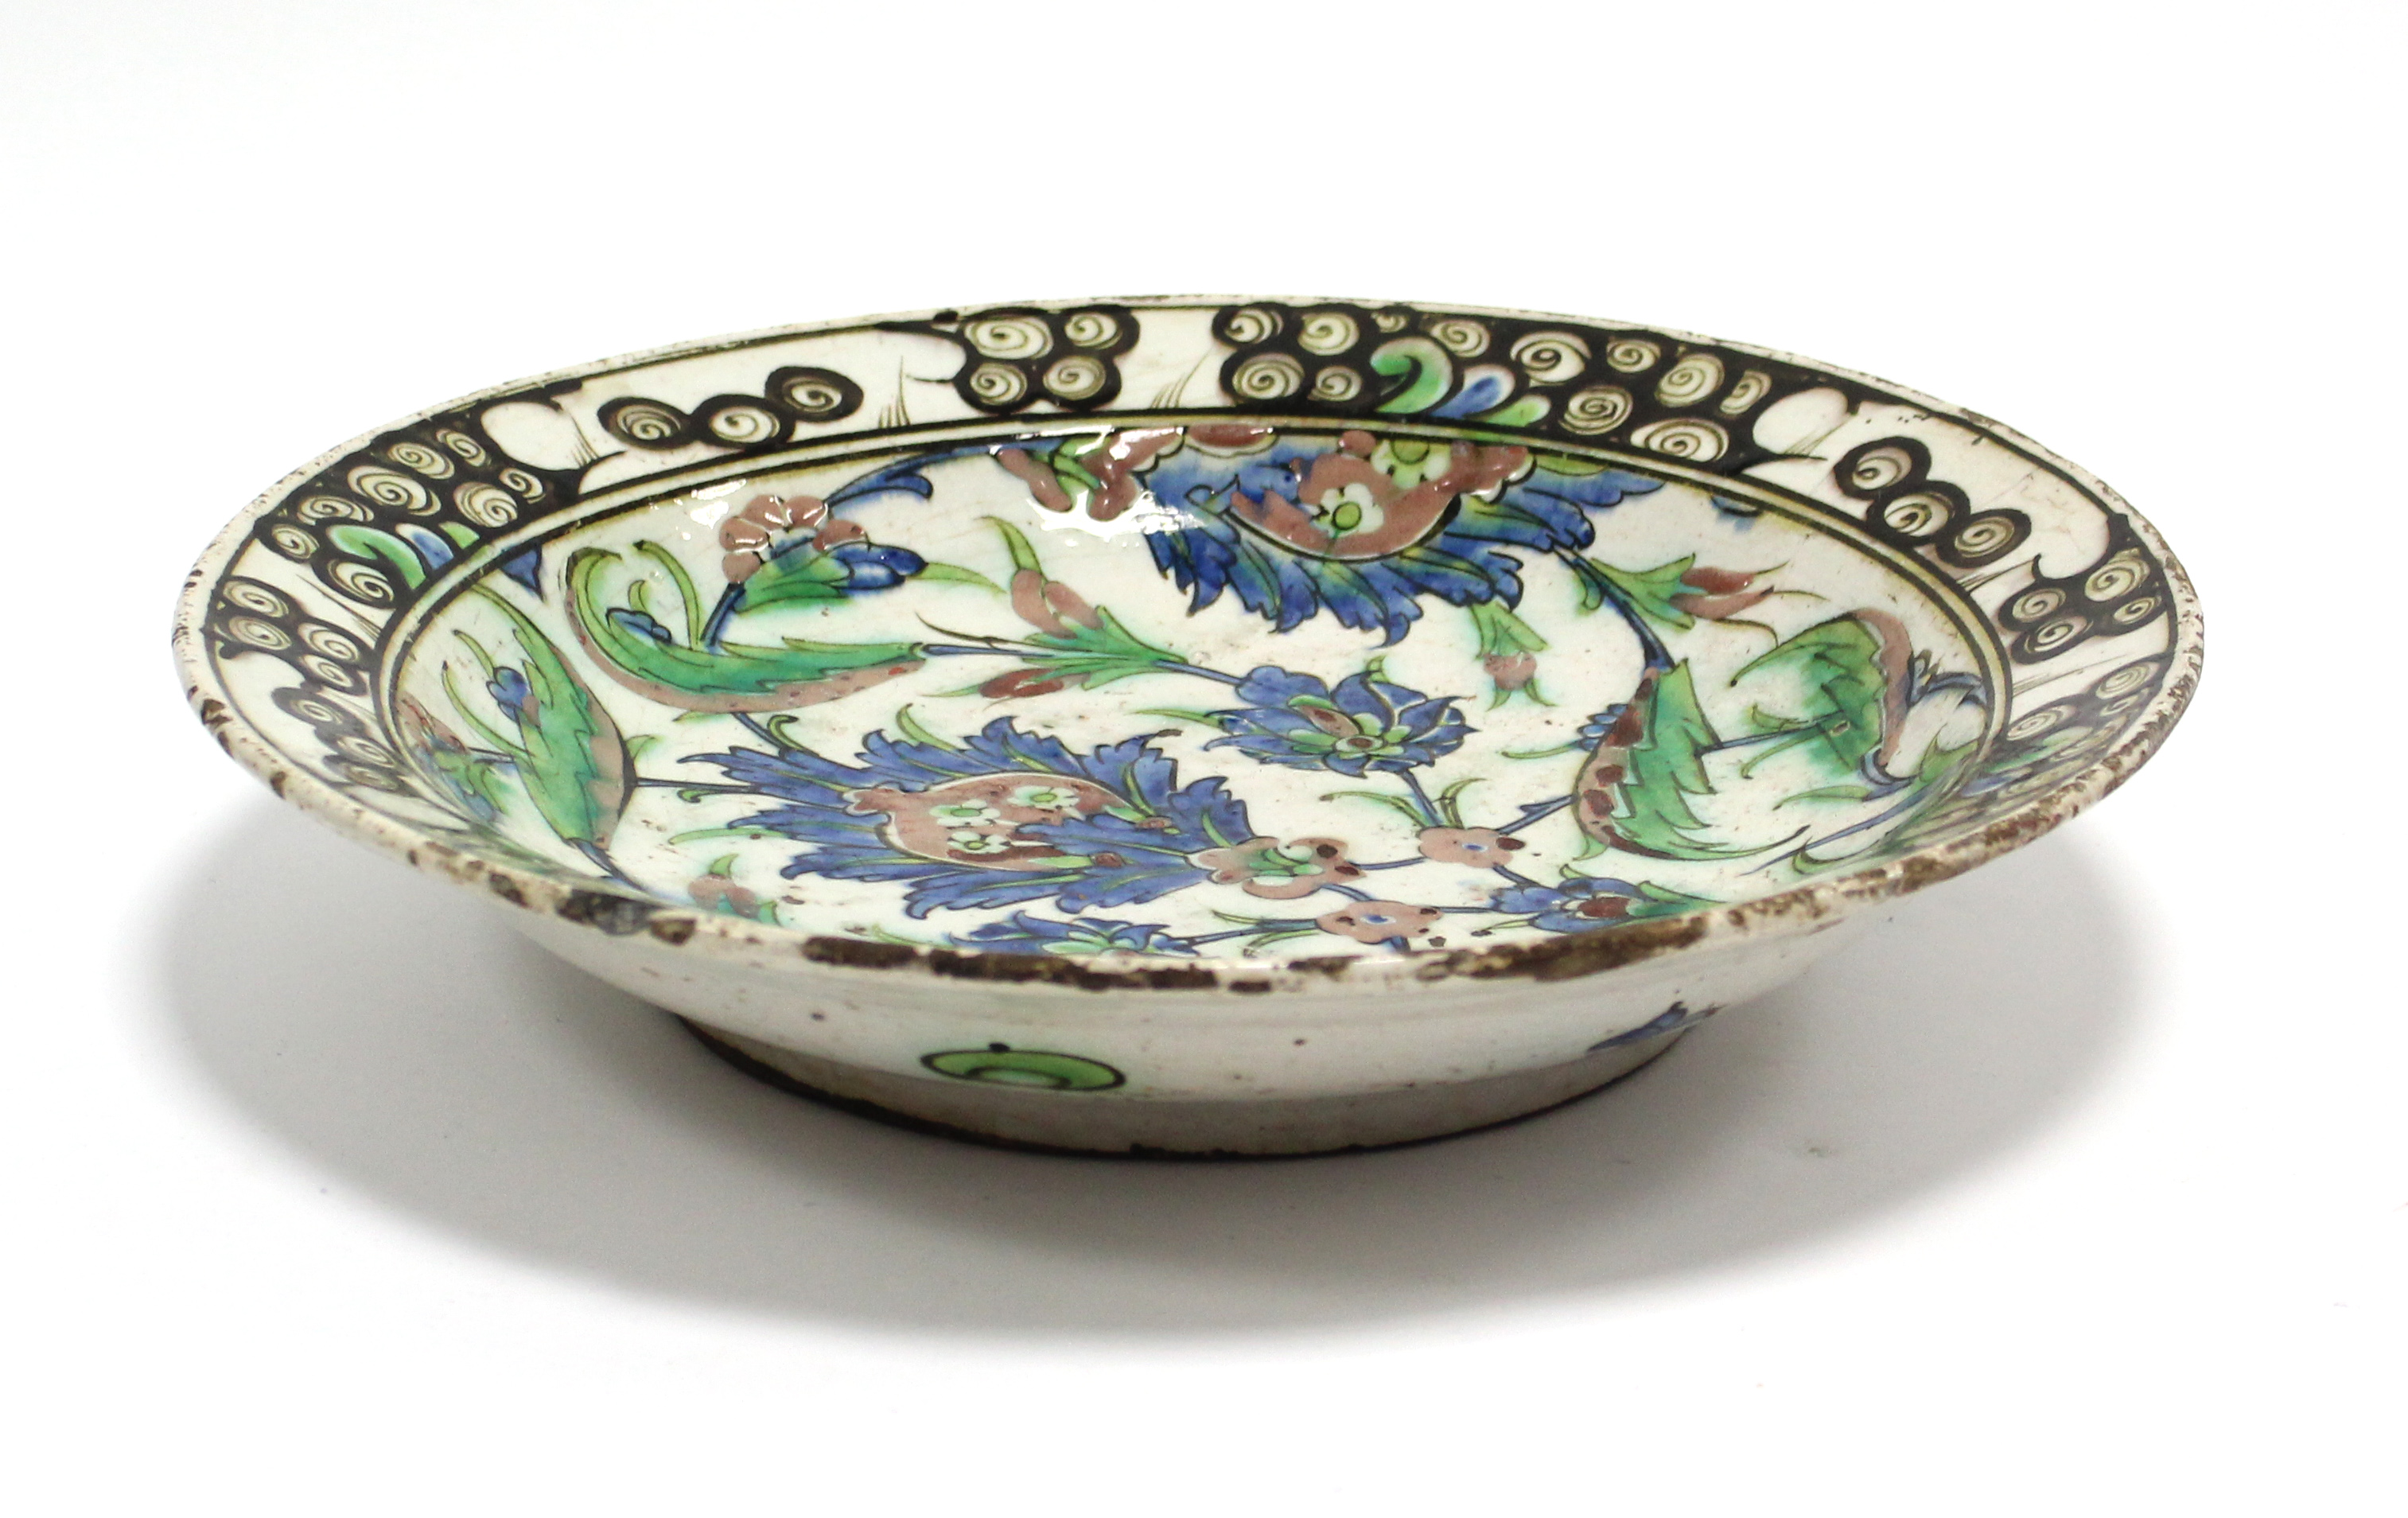 A 17th century IZNIK POTTERY SHALLOW DISH with polychrome painted stylised floral decoration - Image 3 of 6